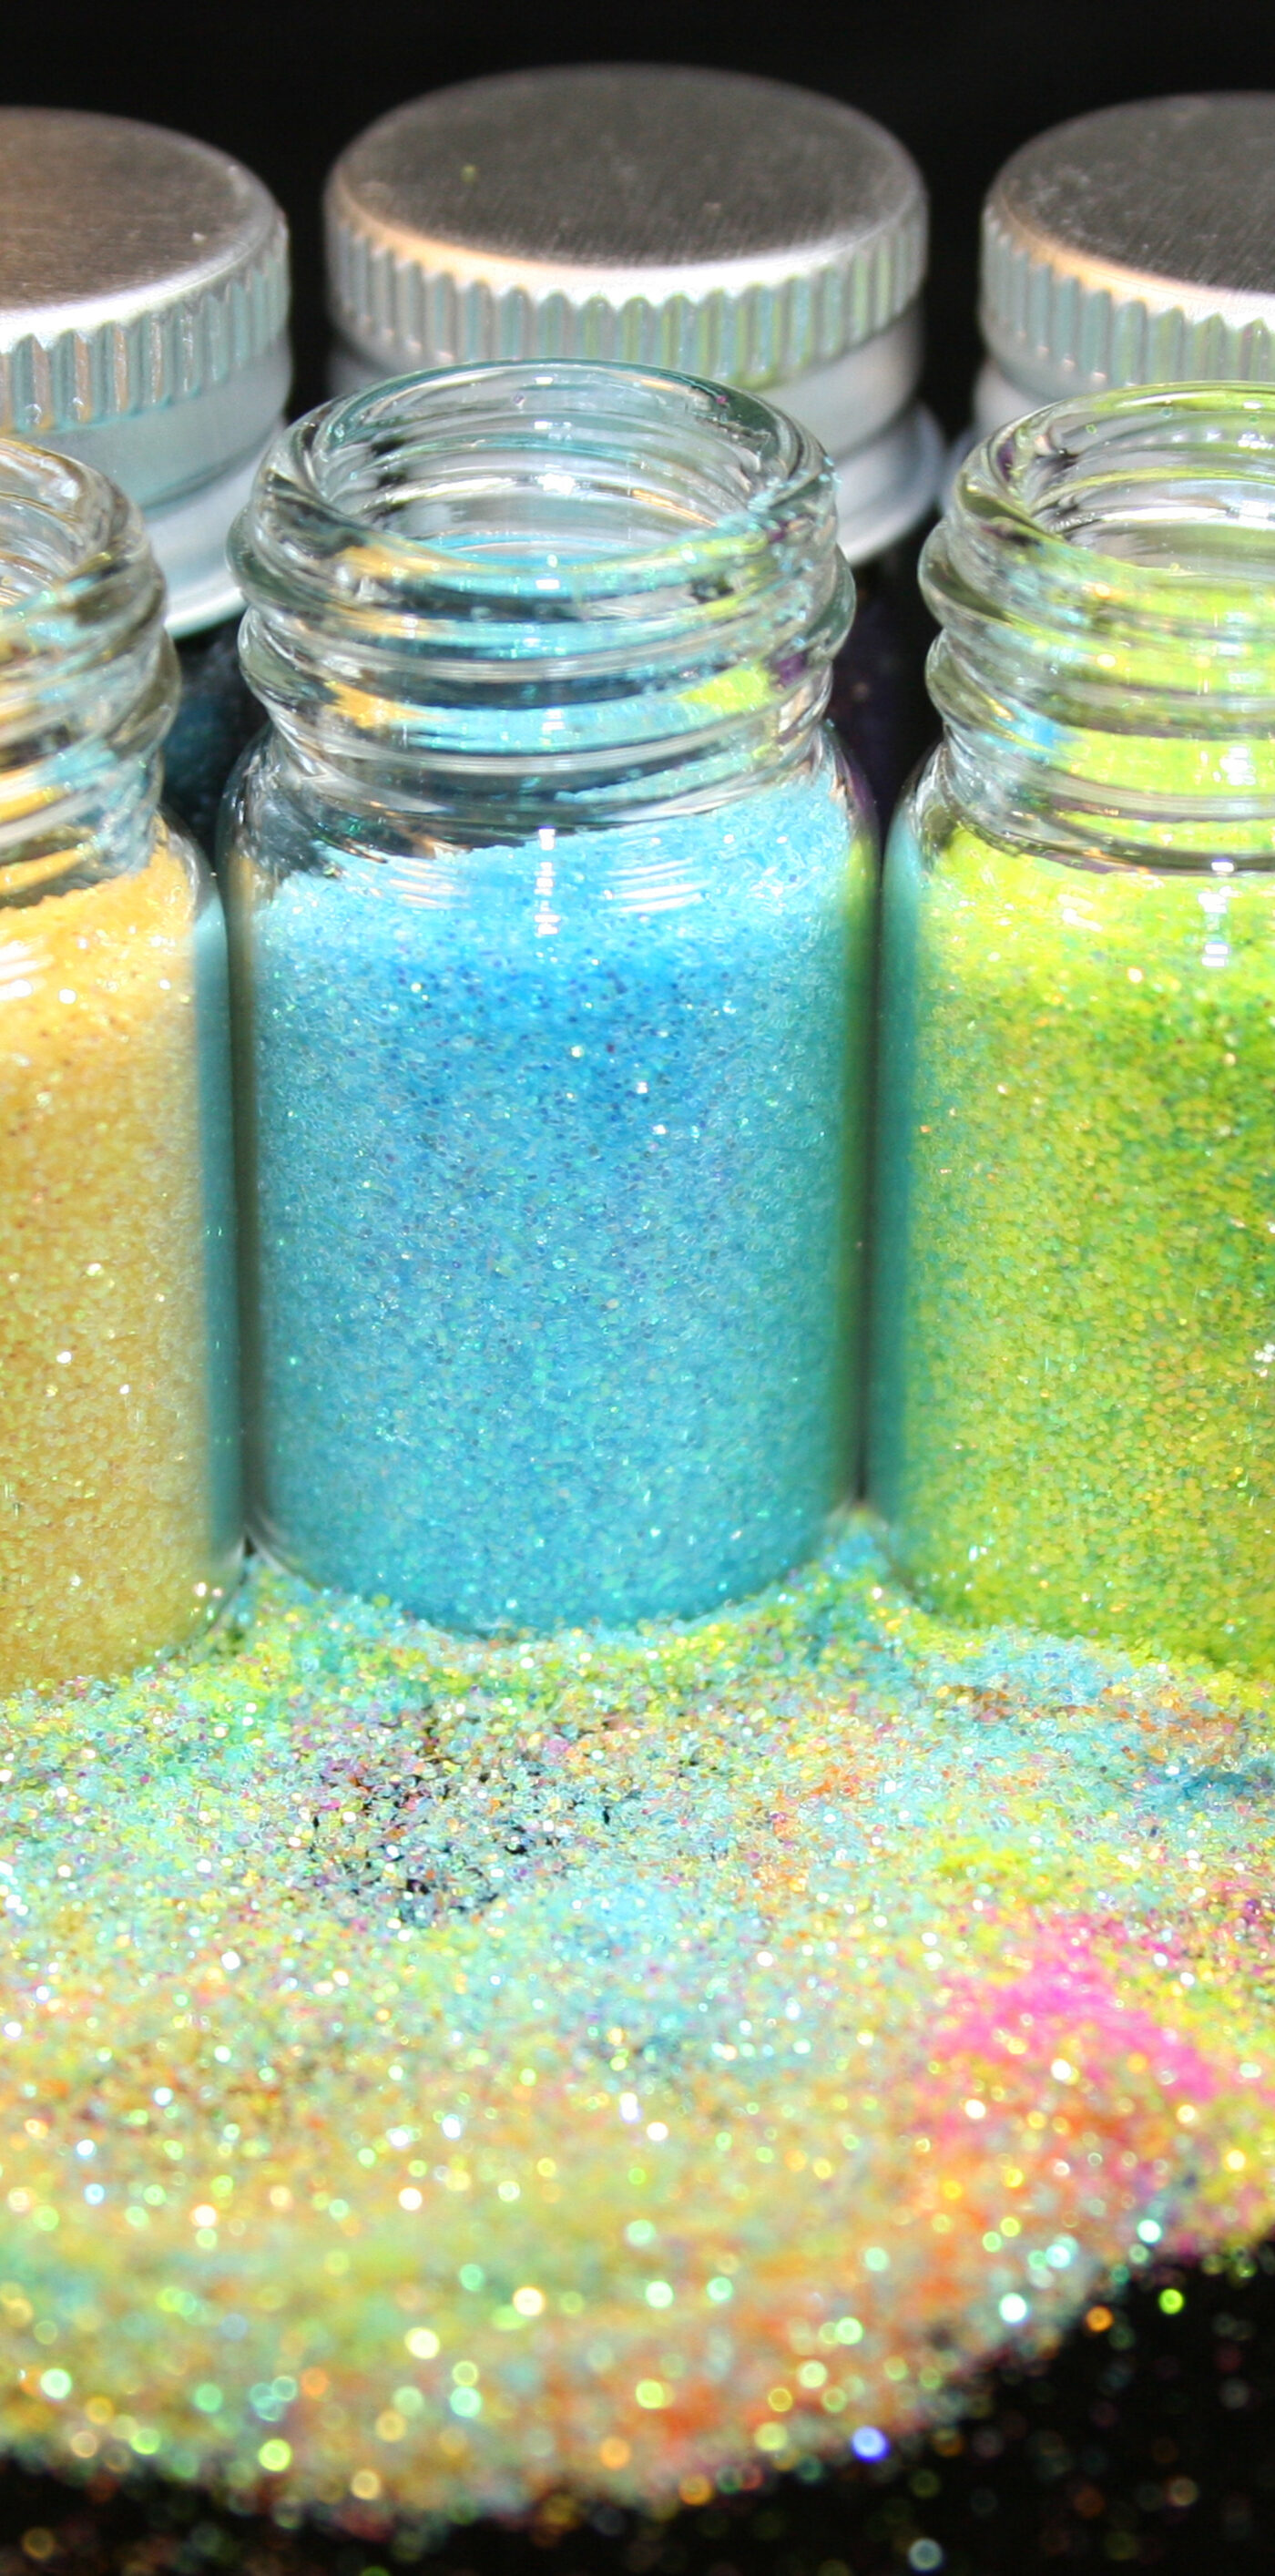 The Problem with Glitter: A Little Sparkle with Major Consequences